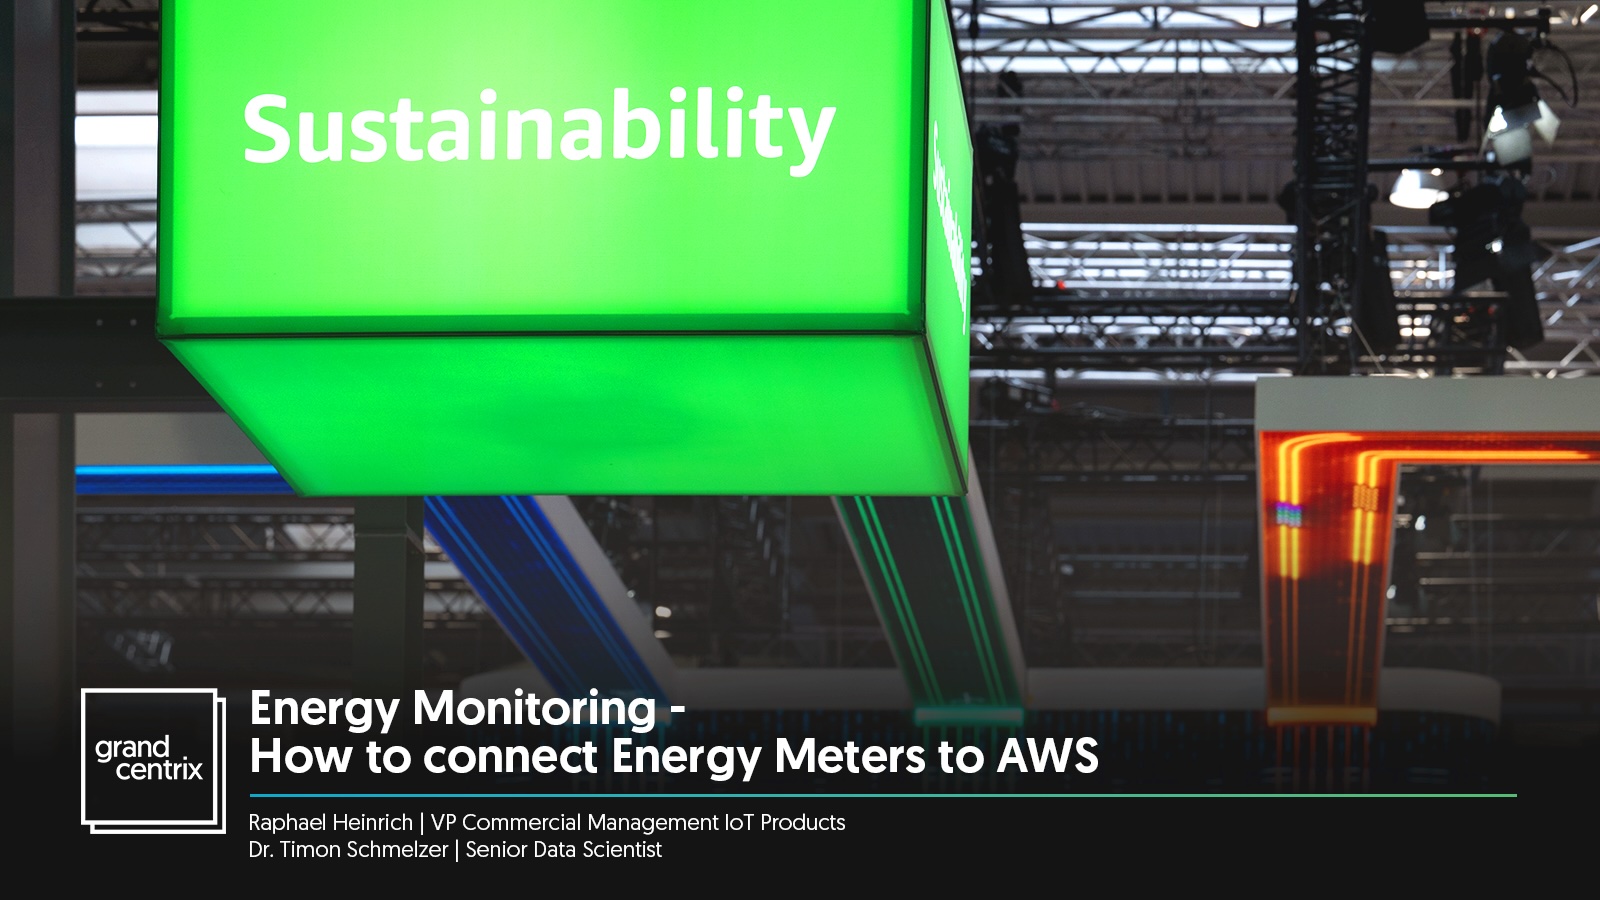 Energy Monitoring - How to connect Energy Meters to AWS